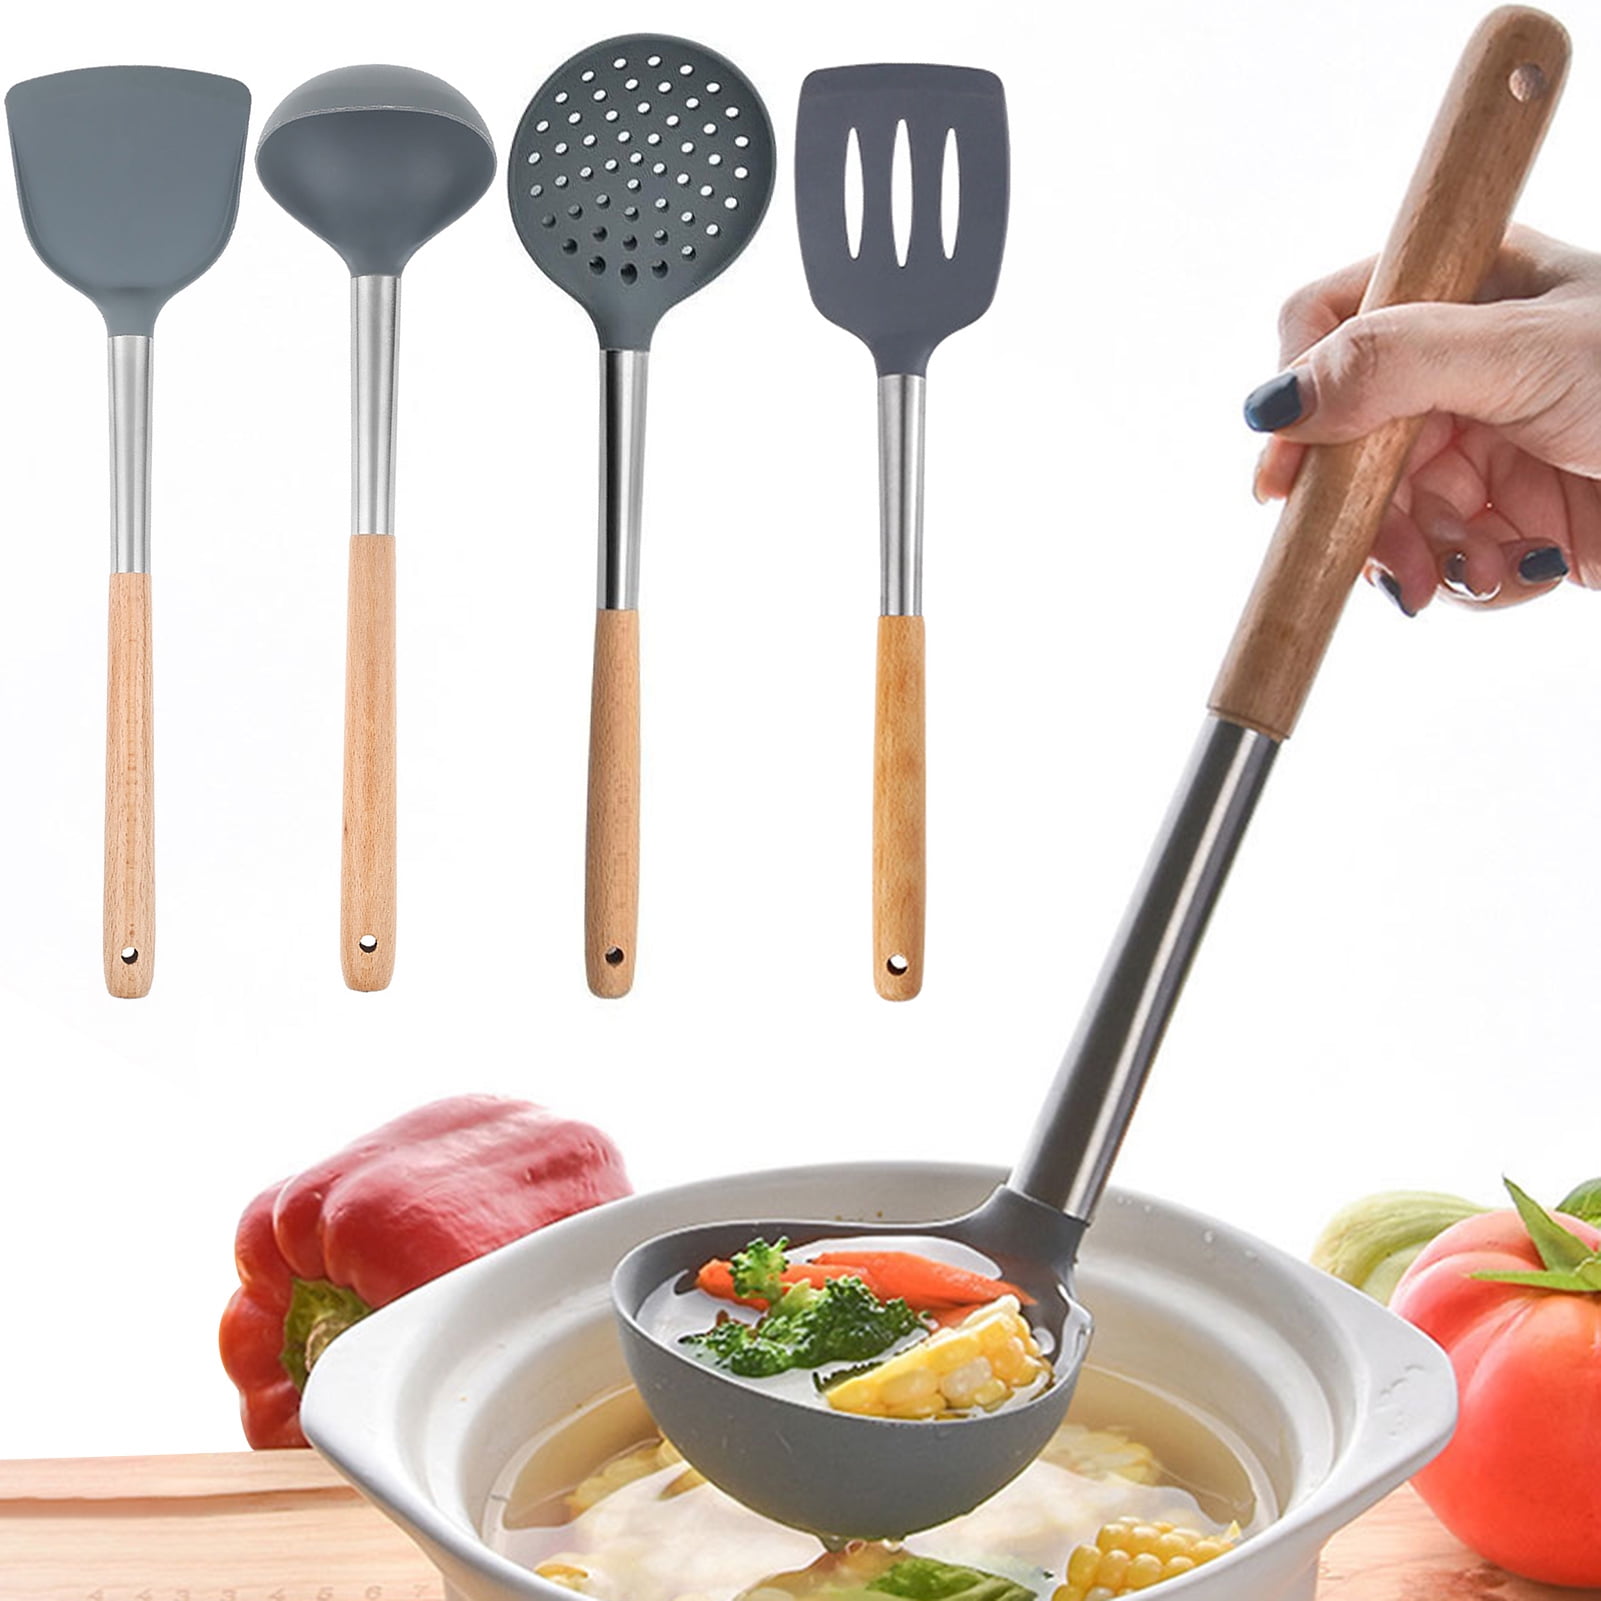 This is How to Clean Wooden Kitchen Utensils - The Manual